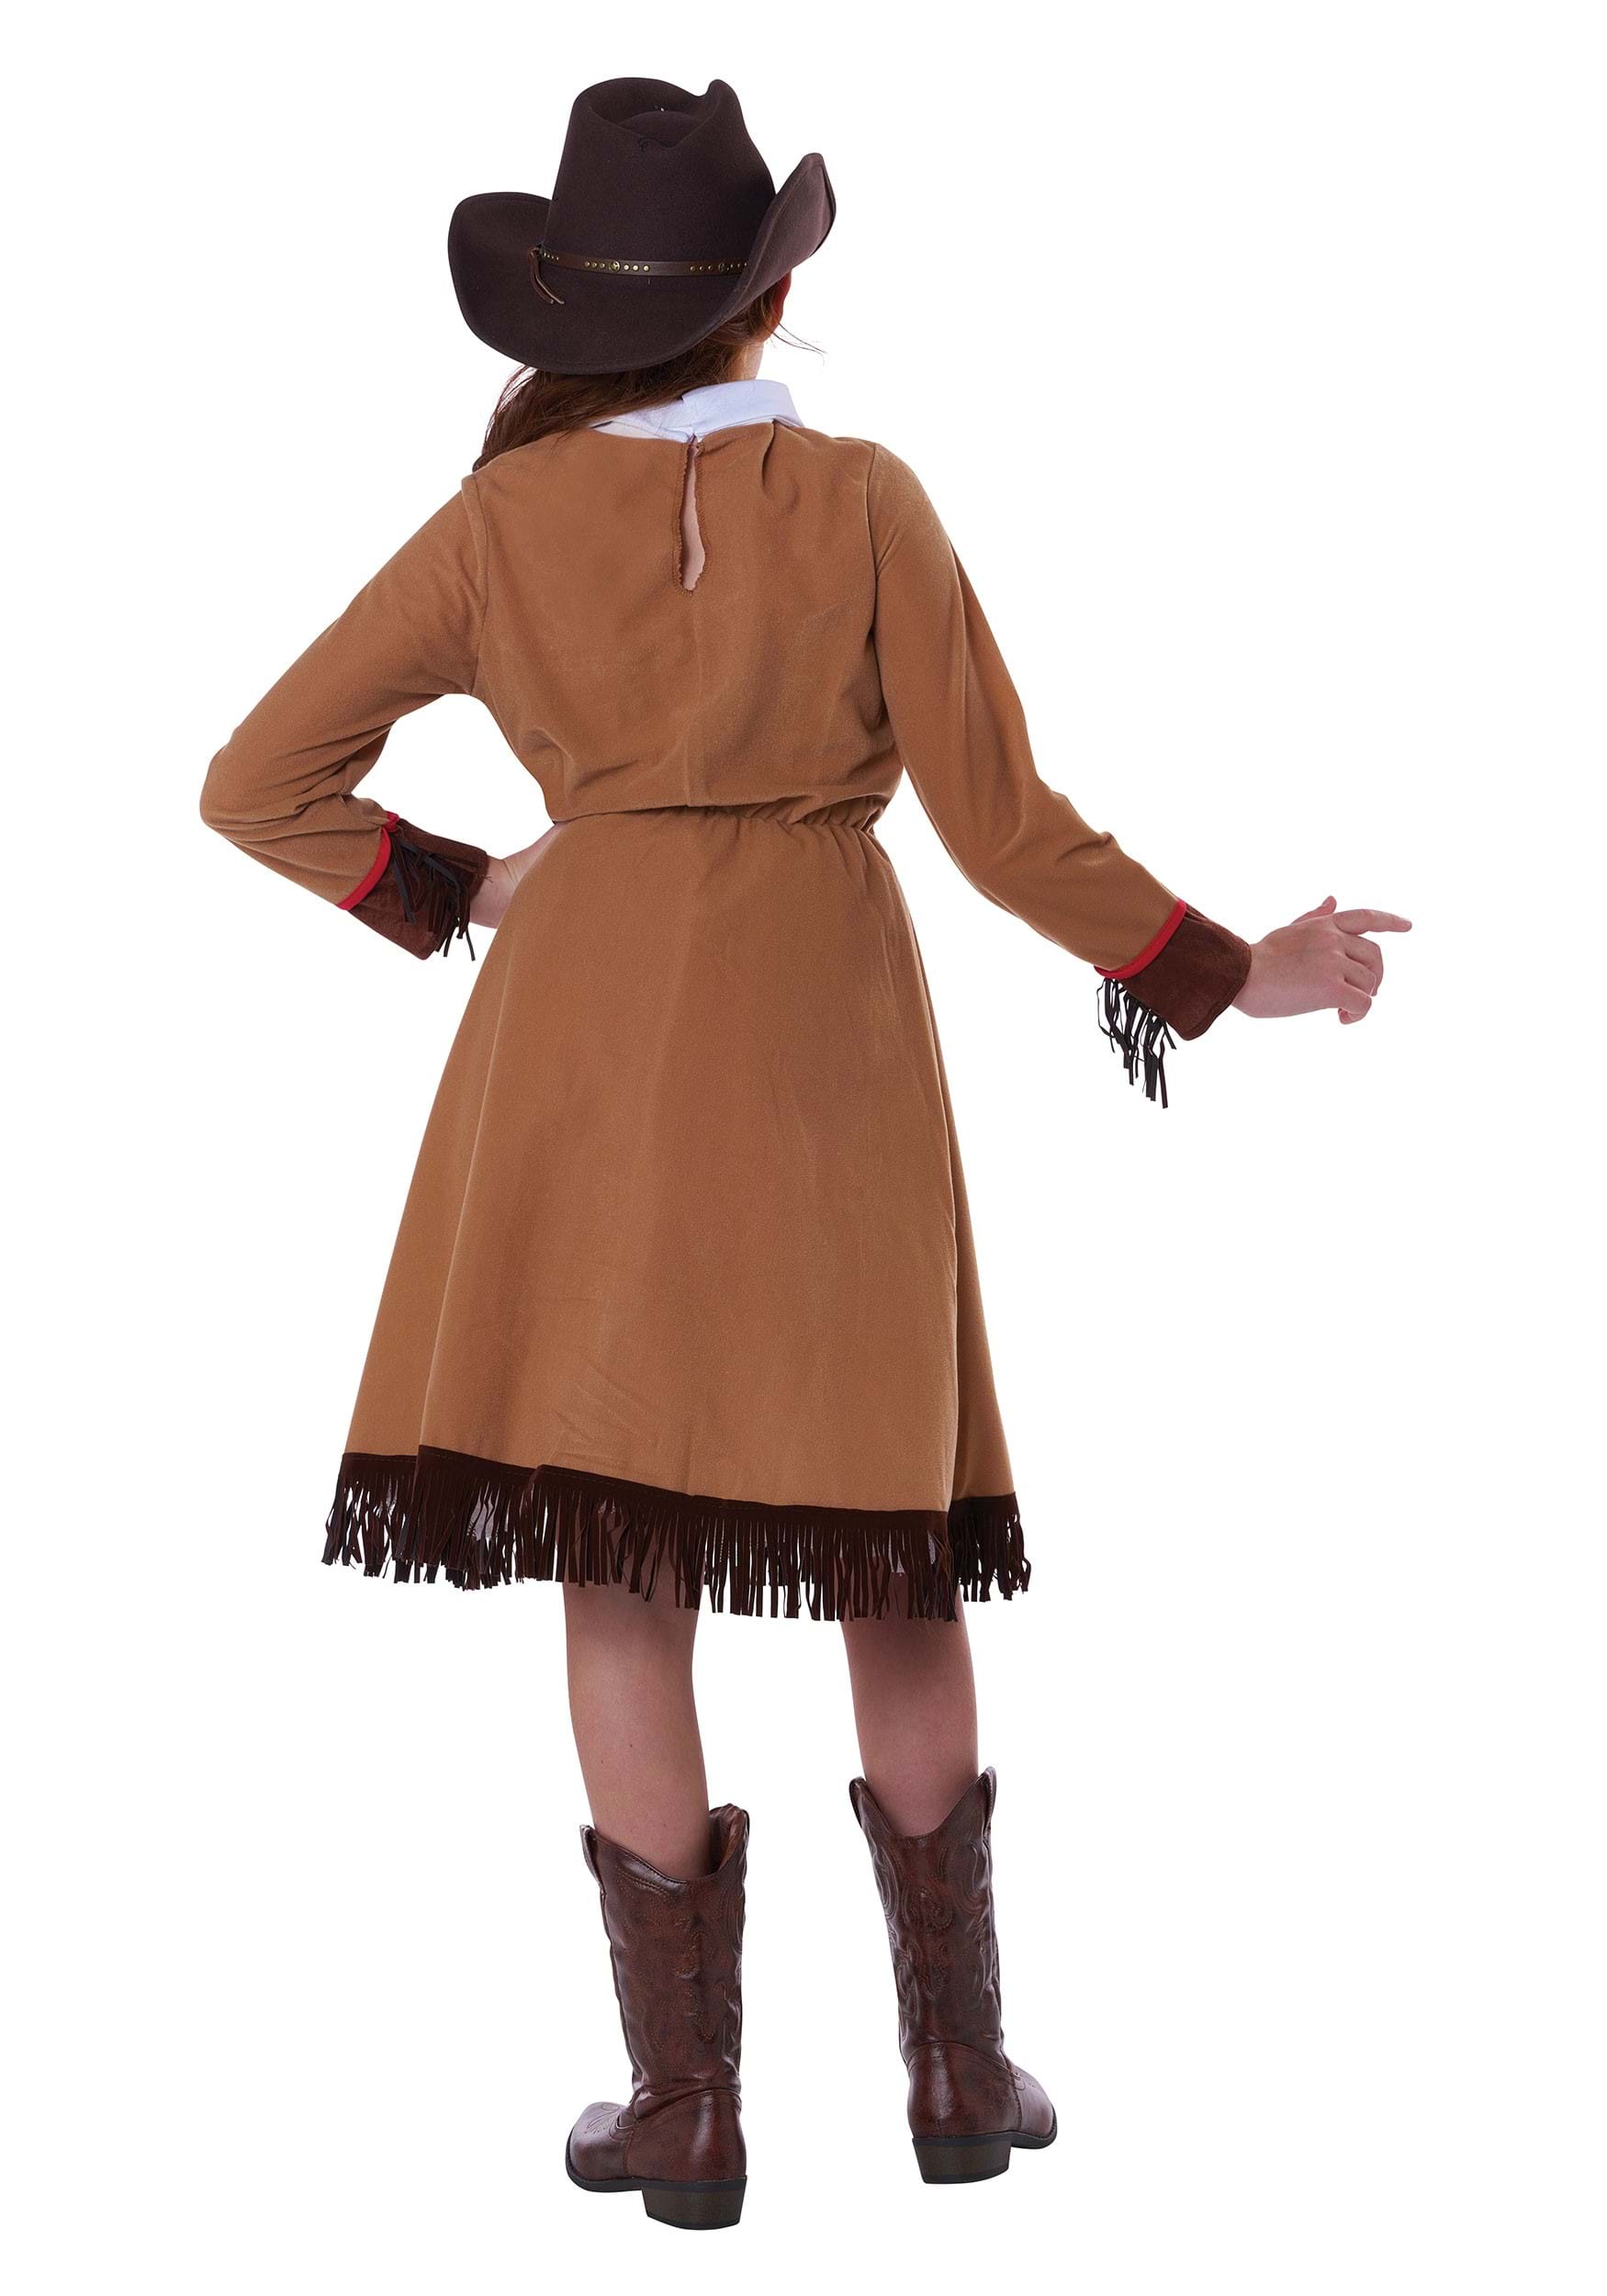 Annie Oakley Girls Costume , Old Western Costumes For Girls